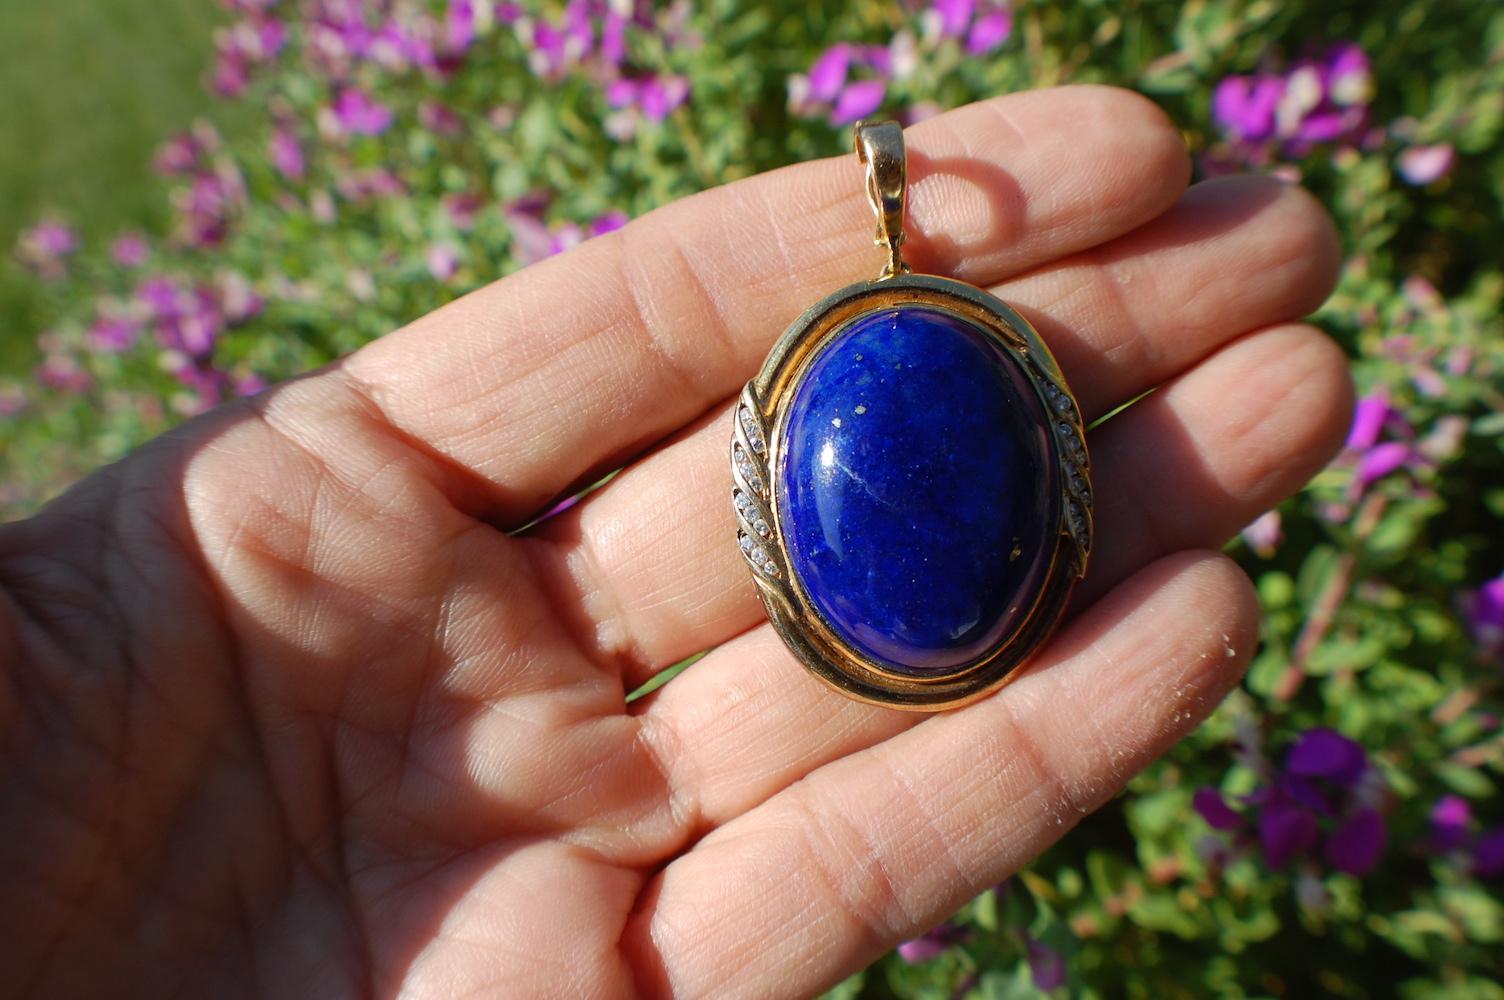  Lapis Lazuli and Diamond Pendant or Enhancer 

14 karat yellow gold bezel surrounded by diamonds displays a  large Lapis Lazuli measuring 1.50 inches. This pendant can be used as an enhancer measuring  .50 inch for a large chain attachment.

 The